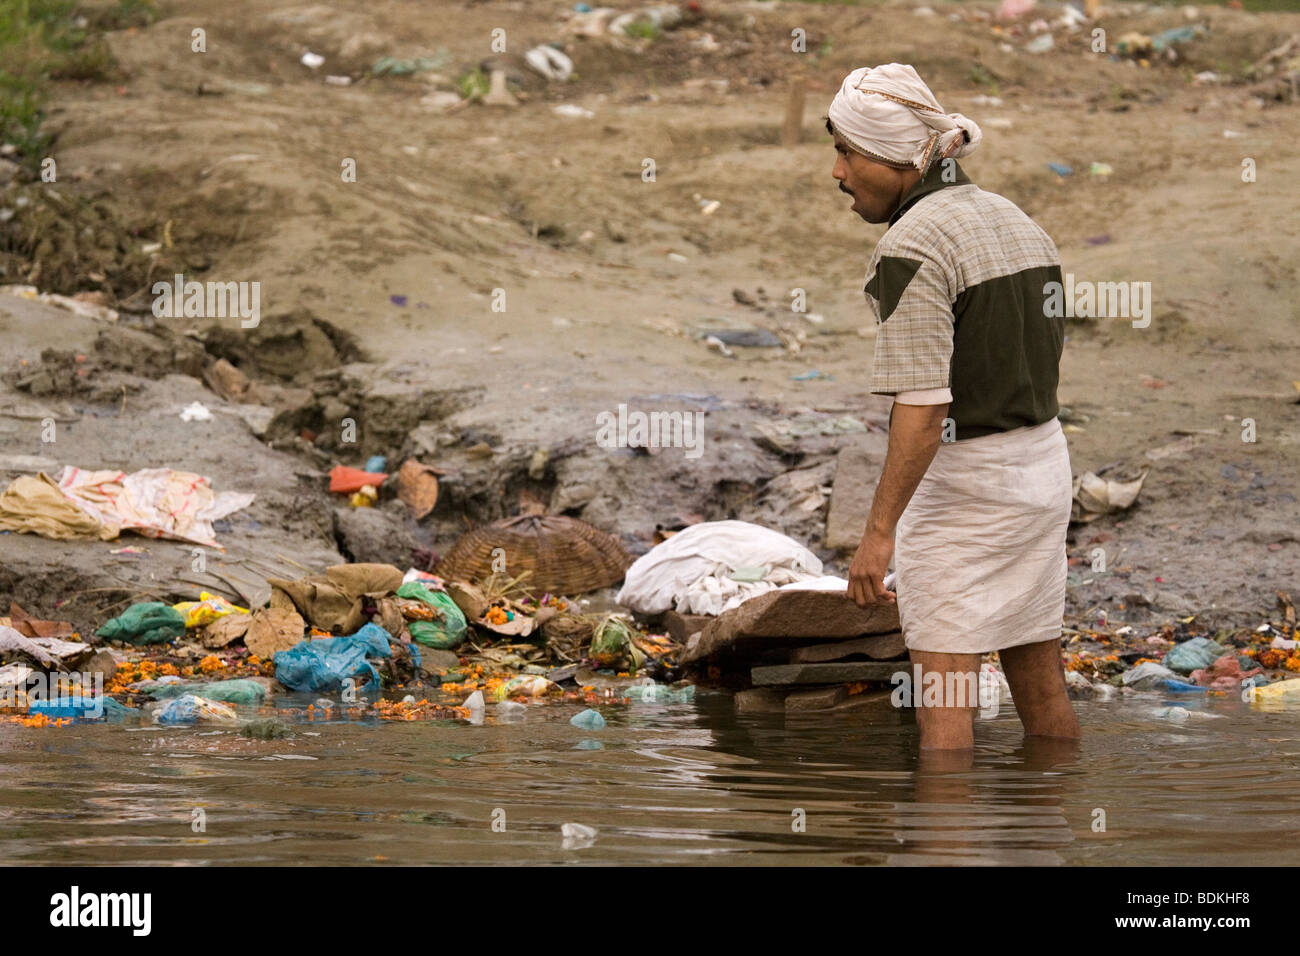 A dhobi (laundry man) washes clothes on the banks of the Ganga (Ganges) river in Varanasi, India. Stock Photo